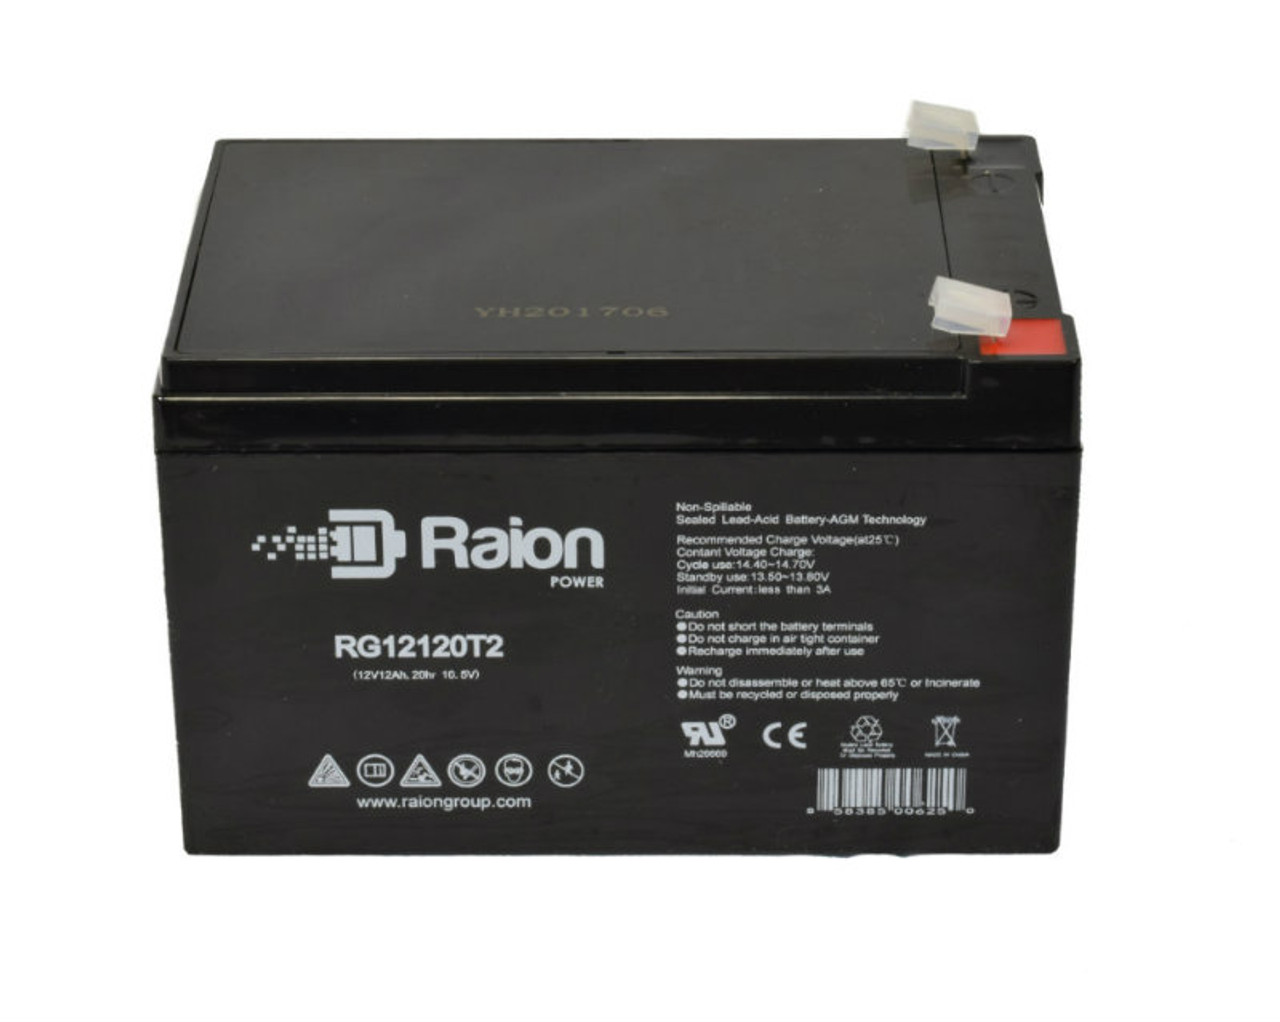 Raion Power RG12120T2 SLA Battery for Electric Mobility UltraLite Fold & Go Powerchair 760 Wheelchairs